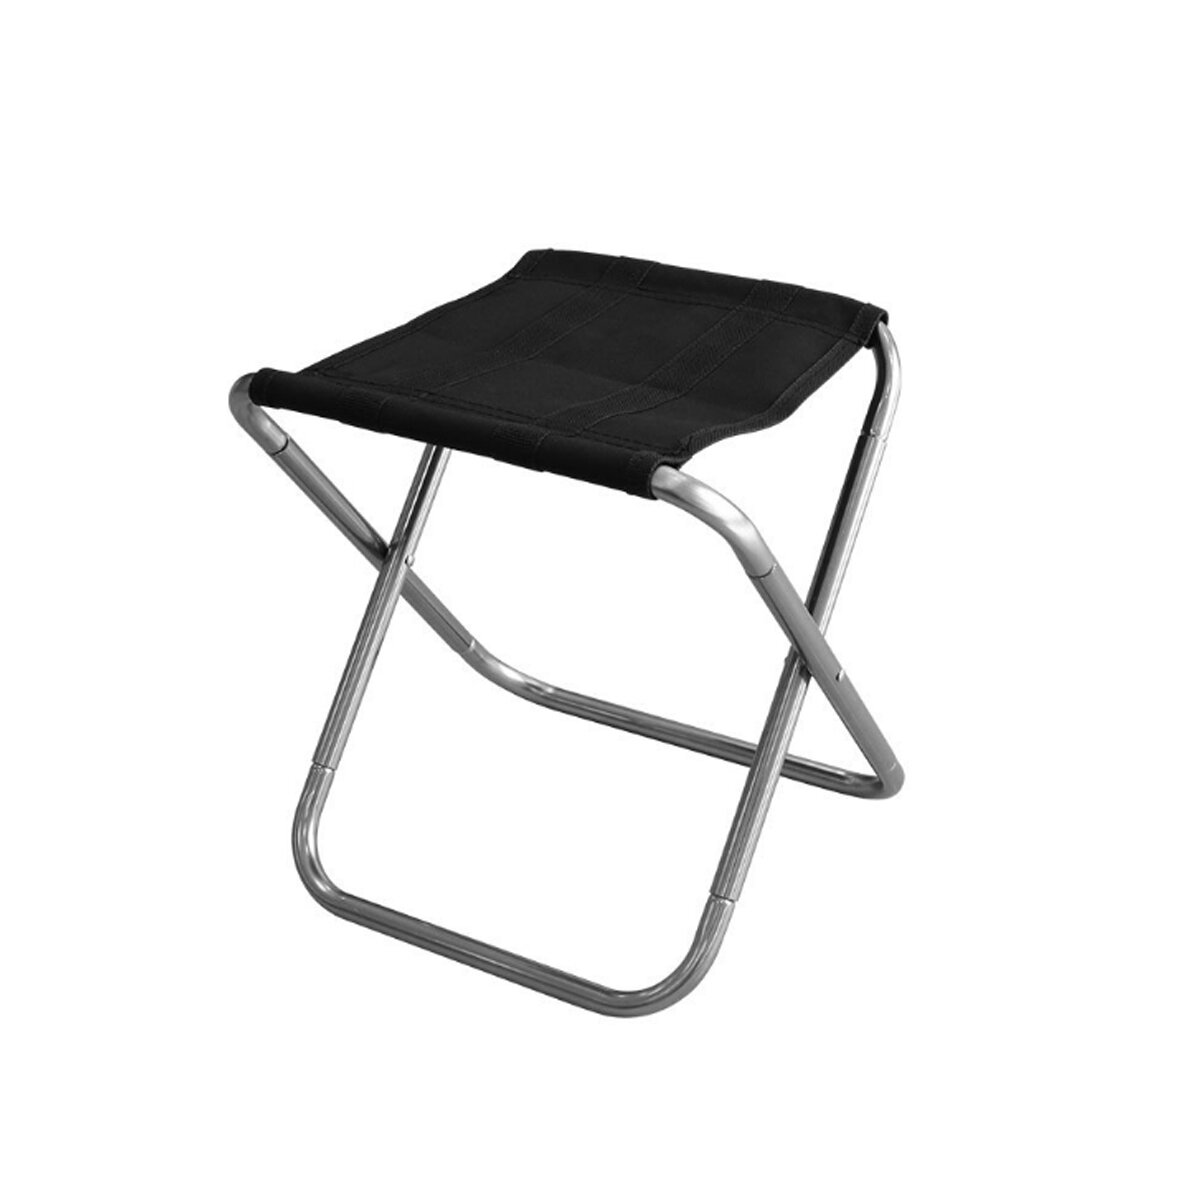 Portable Folding Chair Outdoor Camping Chair Traveling Picnic BBQ Seats Max Load 100KG